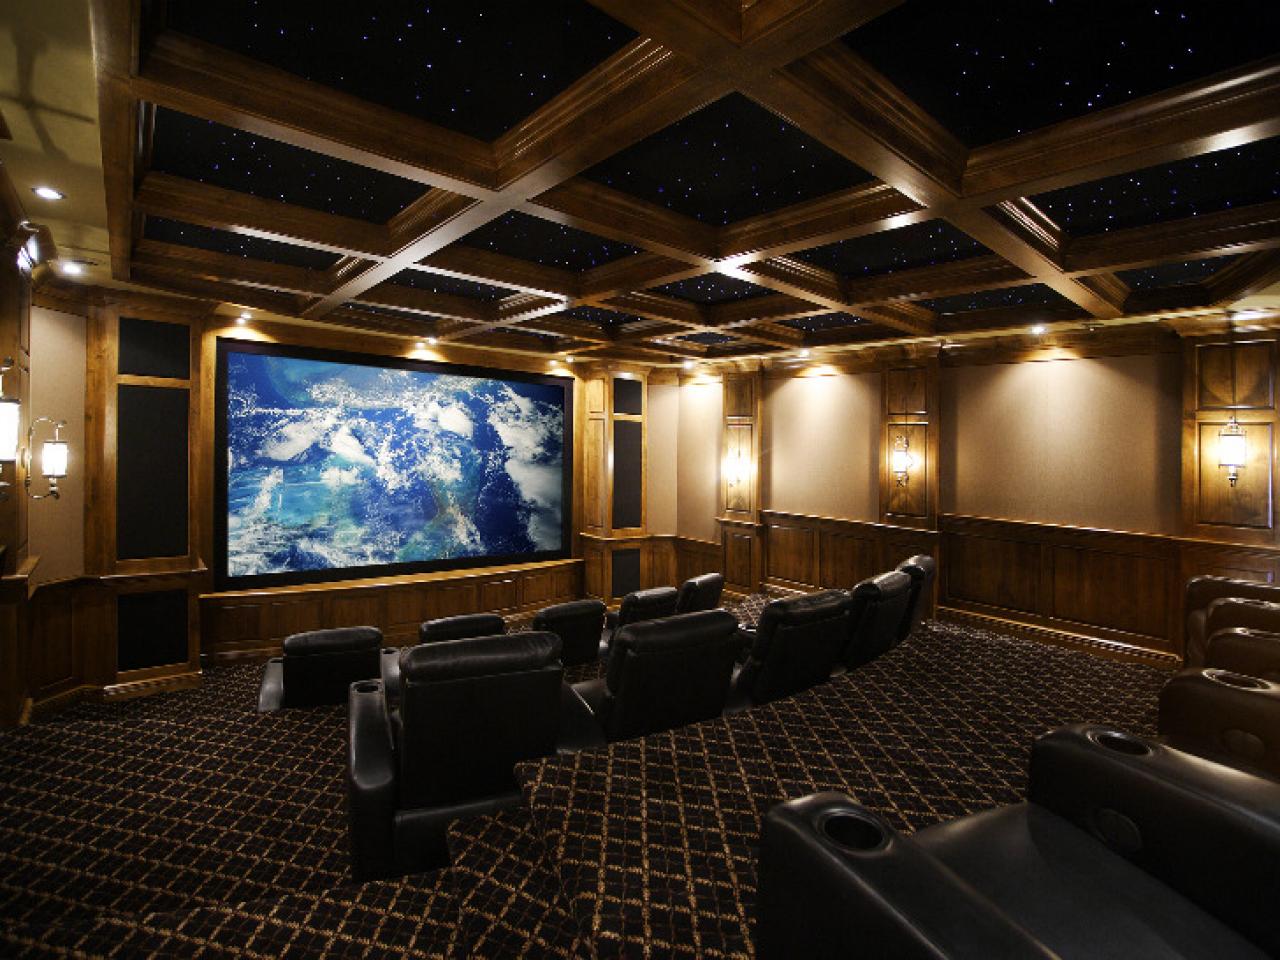 Home Theaters by Budget | Home Remodeling - Ideas for Basements, Home ...